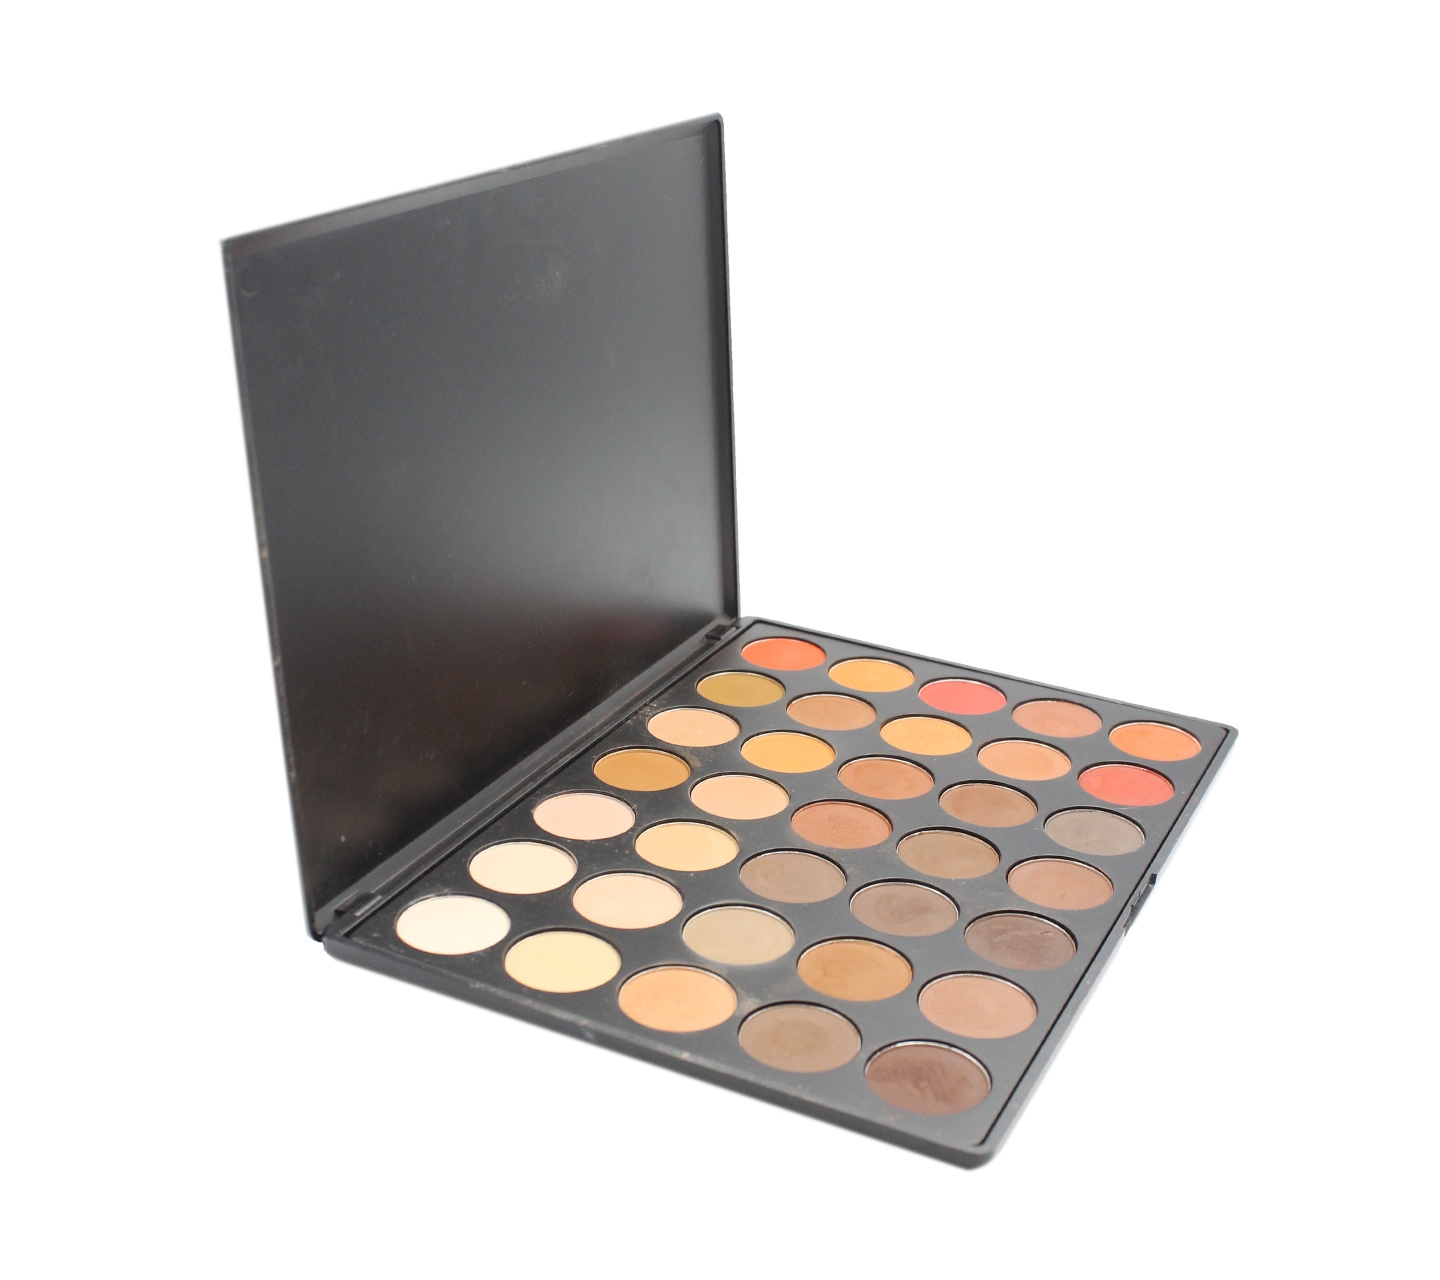 Morphe 35OM Glow Matte Eyeshadow Sets and Palette